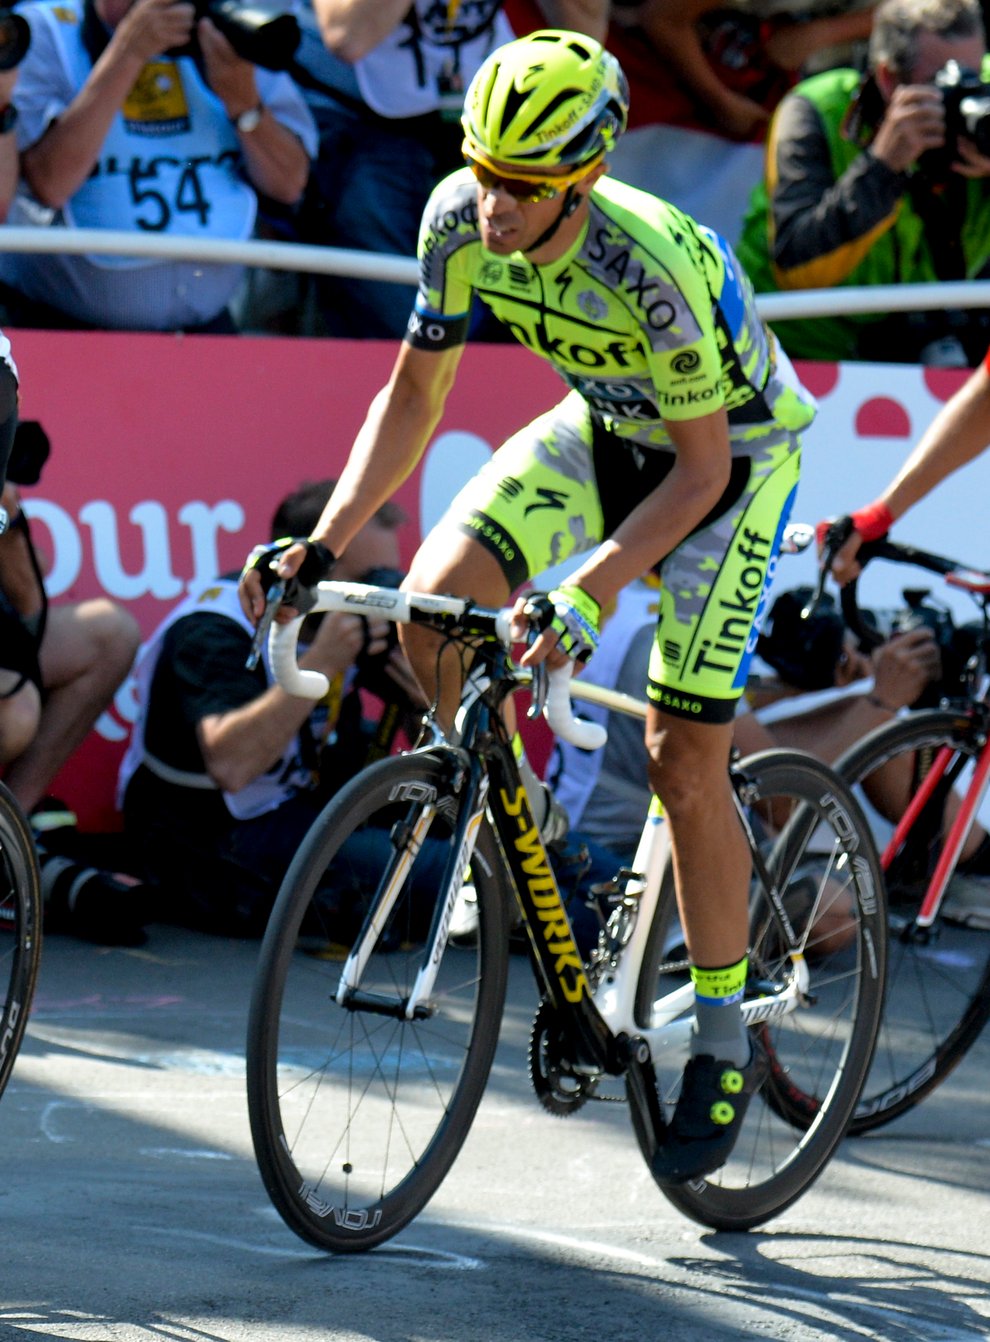 Contador (right) was beaten several times by Froome (left) at the Tour (PA Images)